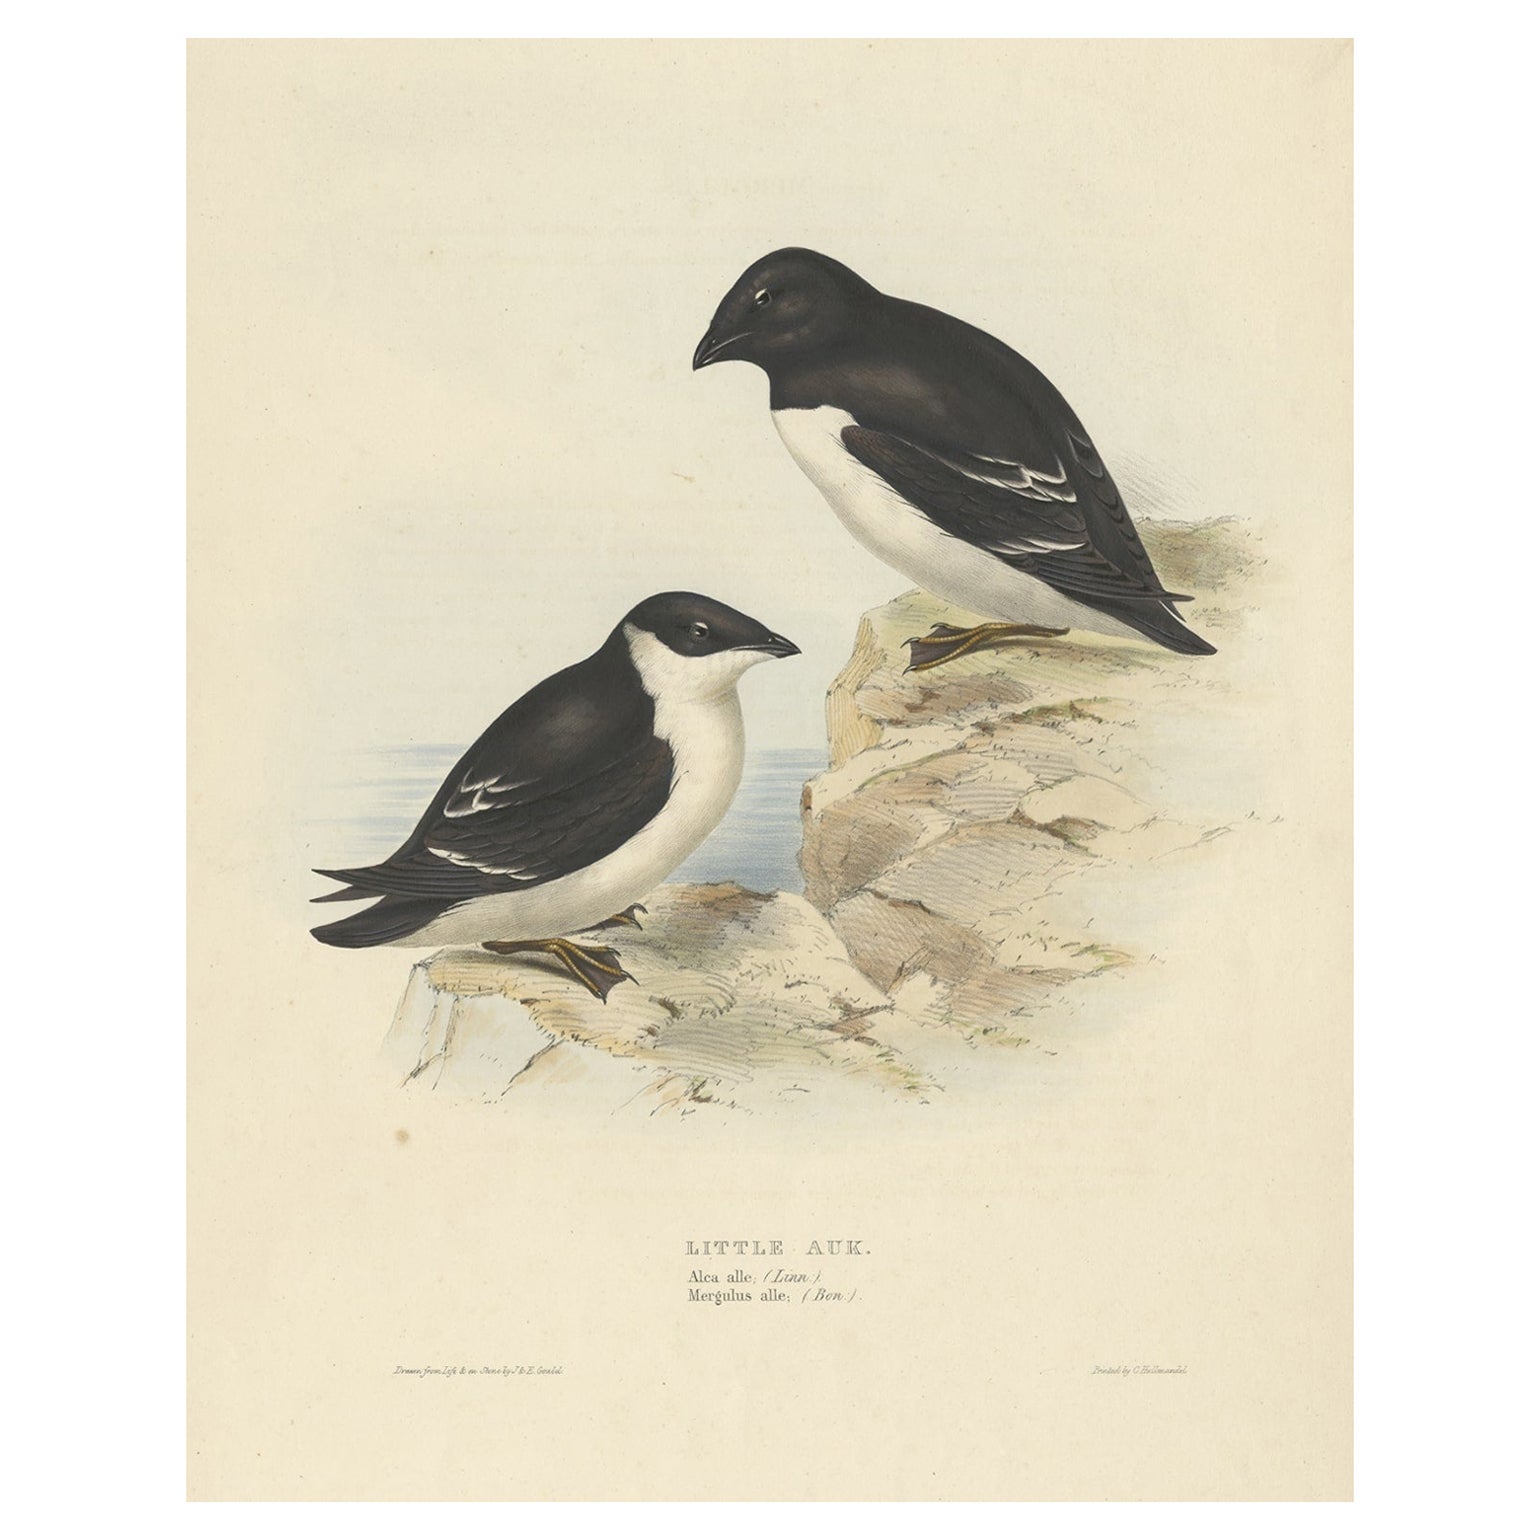 Old Bird Print Depicting the Little Auk by Gould, 1832 For Sale